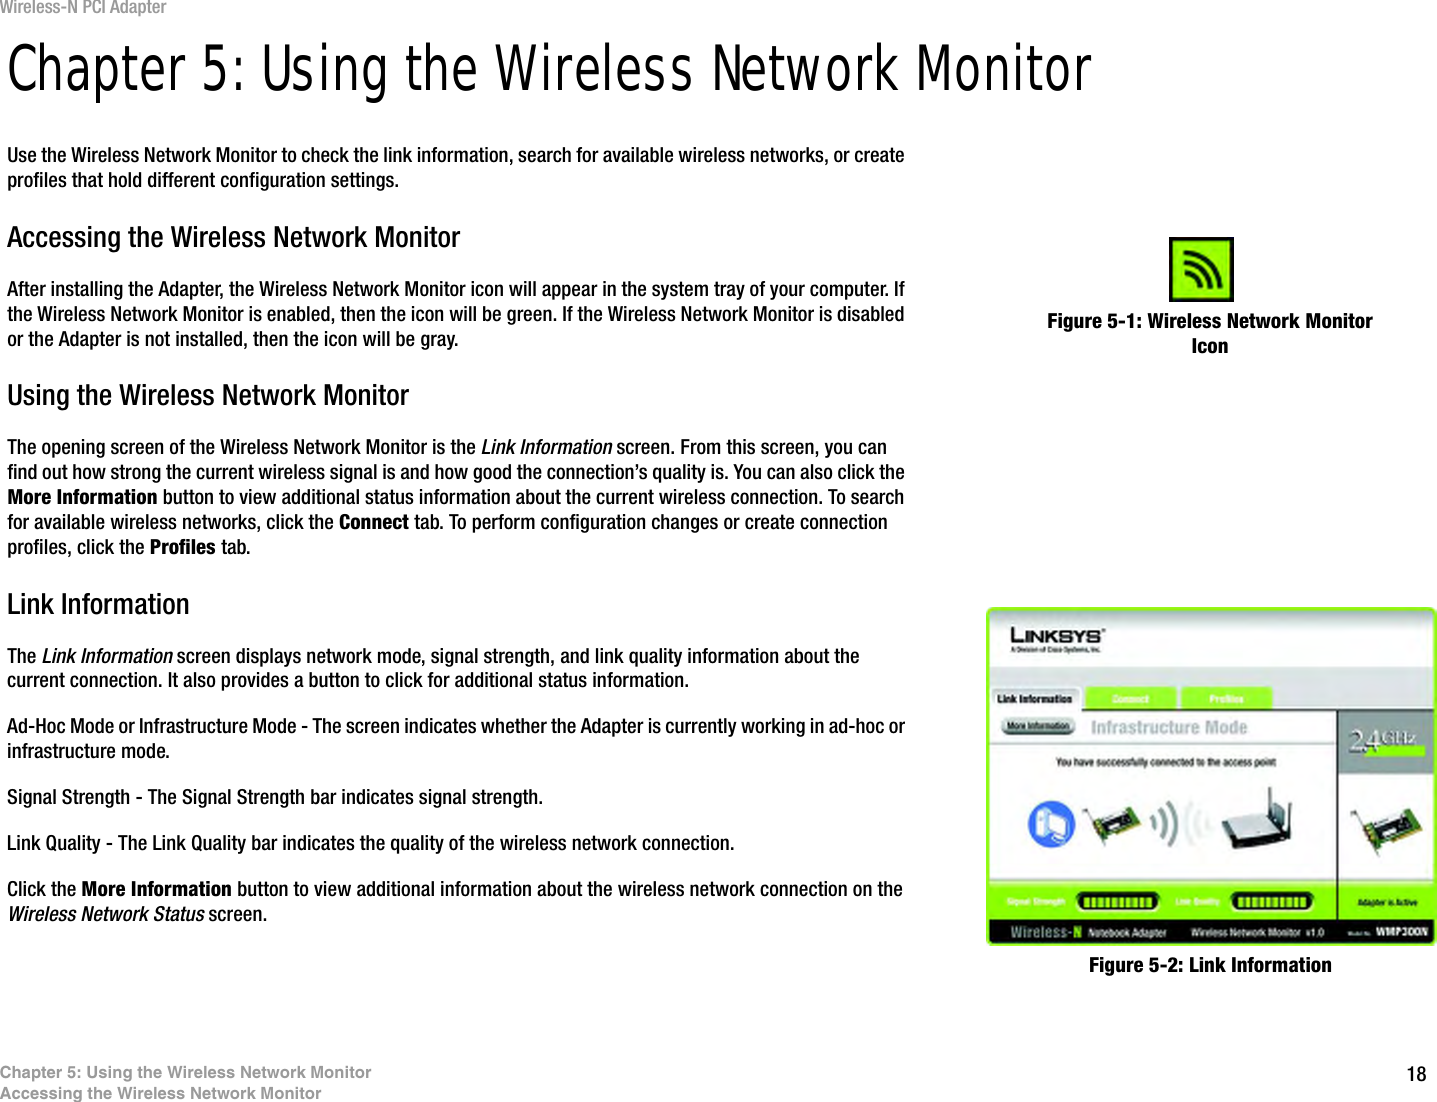 18Chapter 5: Using the Wireless Network MonitorAccessing the Wireless Network MonitorWireless-N PCI AdapterChapter 5: Using the Wireless Network MonitorUse the Wireless Network Monitor to check the link information, search for available wireless networks, or create profiles that hold different configuration settings.Accessing the Wireless Network MonitorAfter installing the Adapter, the Wireless Network Monitor icon will appear in the system tray of your computer. If the Wireless Network Monitor is enabled, then the icon will be green. If the Wireless Network Monitor is disabled or the Adapter is not installed, then the icon will be gray.Using the Wireless Network MonitorThe opening screen of the Wireless Network Monitor is the Link Information screen. From this screen, you can find out how strong the current wireless signal is and how good the connection’s quality is. You can also click the More Information button to view additional status information about the current wireless connection. To search for available wireless networks, click the Connect tab. To perform configuration changes or create connection profiles, click the Profiles tab.Link InformationThe Link Information screen displays network mode, signal strength, and link quality information about the current connection. It also provides a button to click for additional status information.Ad-Hoc Mode or Infrastructure Mode - The screen indicates whether the Adapter is currently working in ad-hoc or infrastructure mode.Signal Strength - The Signal Strength bar indicates signal strength. Link Quality - The Link Quality bar indicates the quality of the wireless network connection.Click the More Information button to view additional information about the wireless network connection on the Wireless Network Status screen.Figure 5-1: Wireless Network Monitor IconFigure 5-2: Link Information